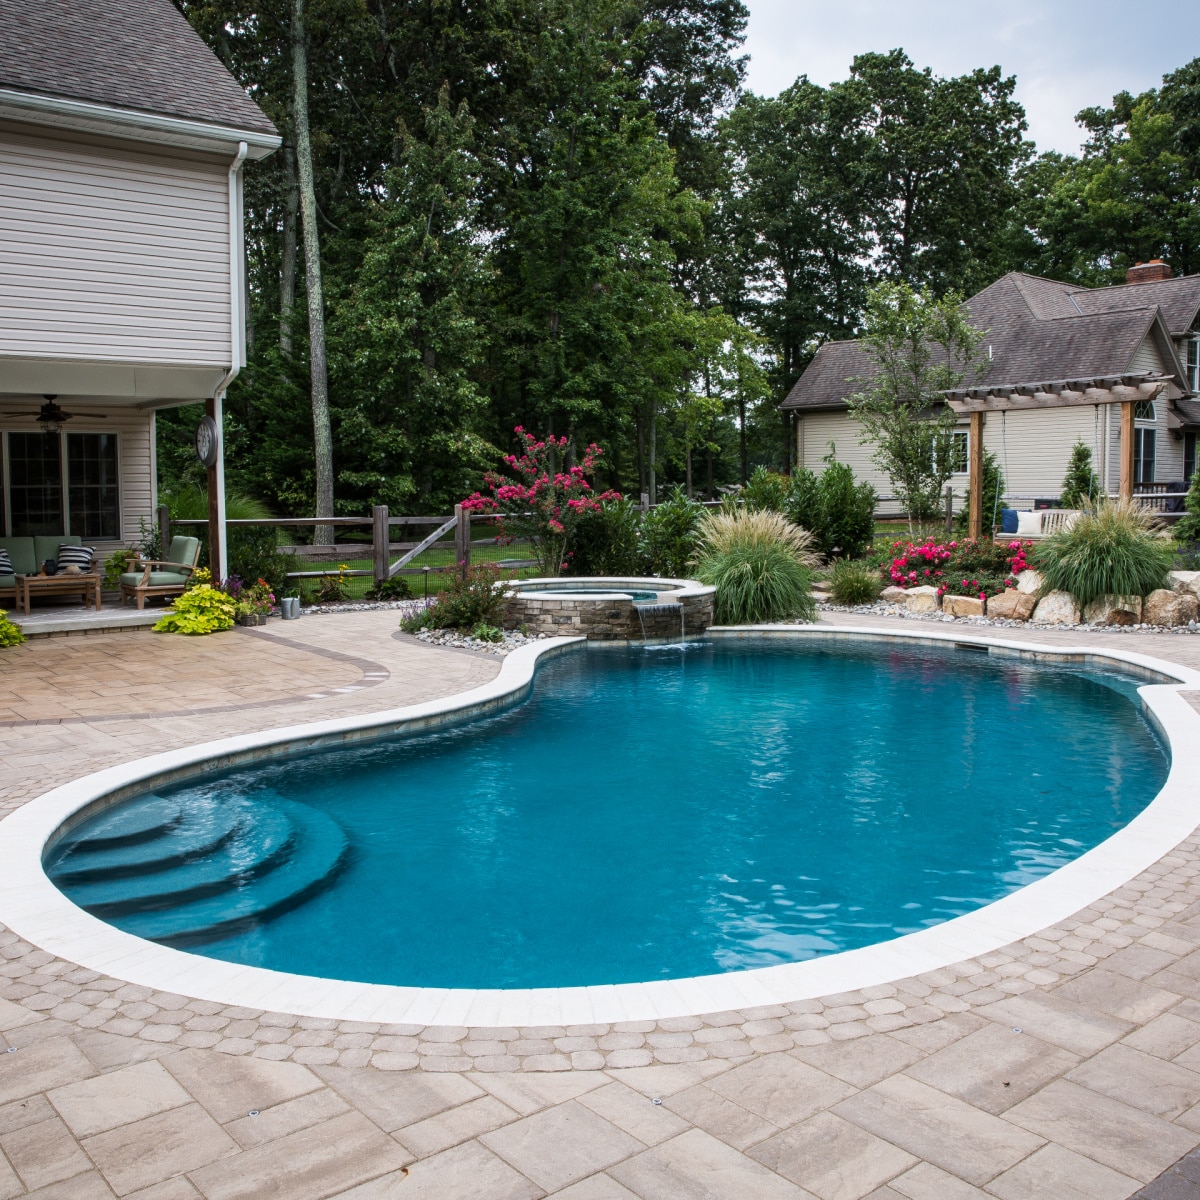 Winterize your pool